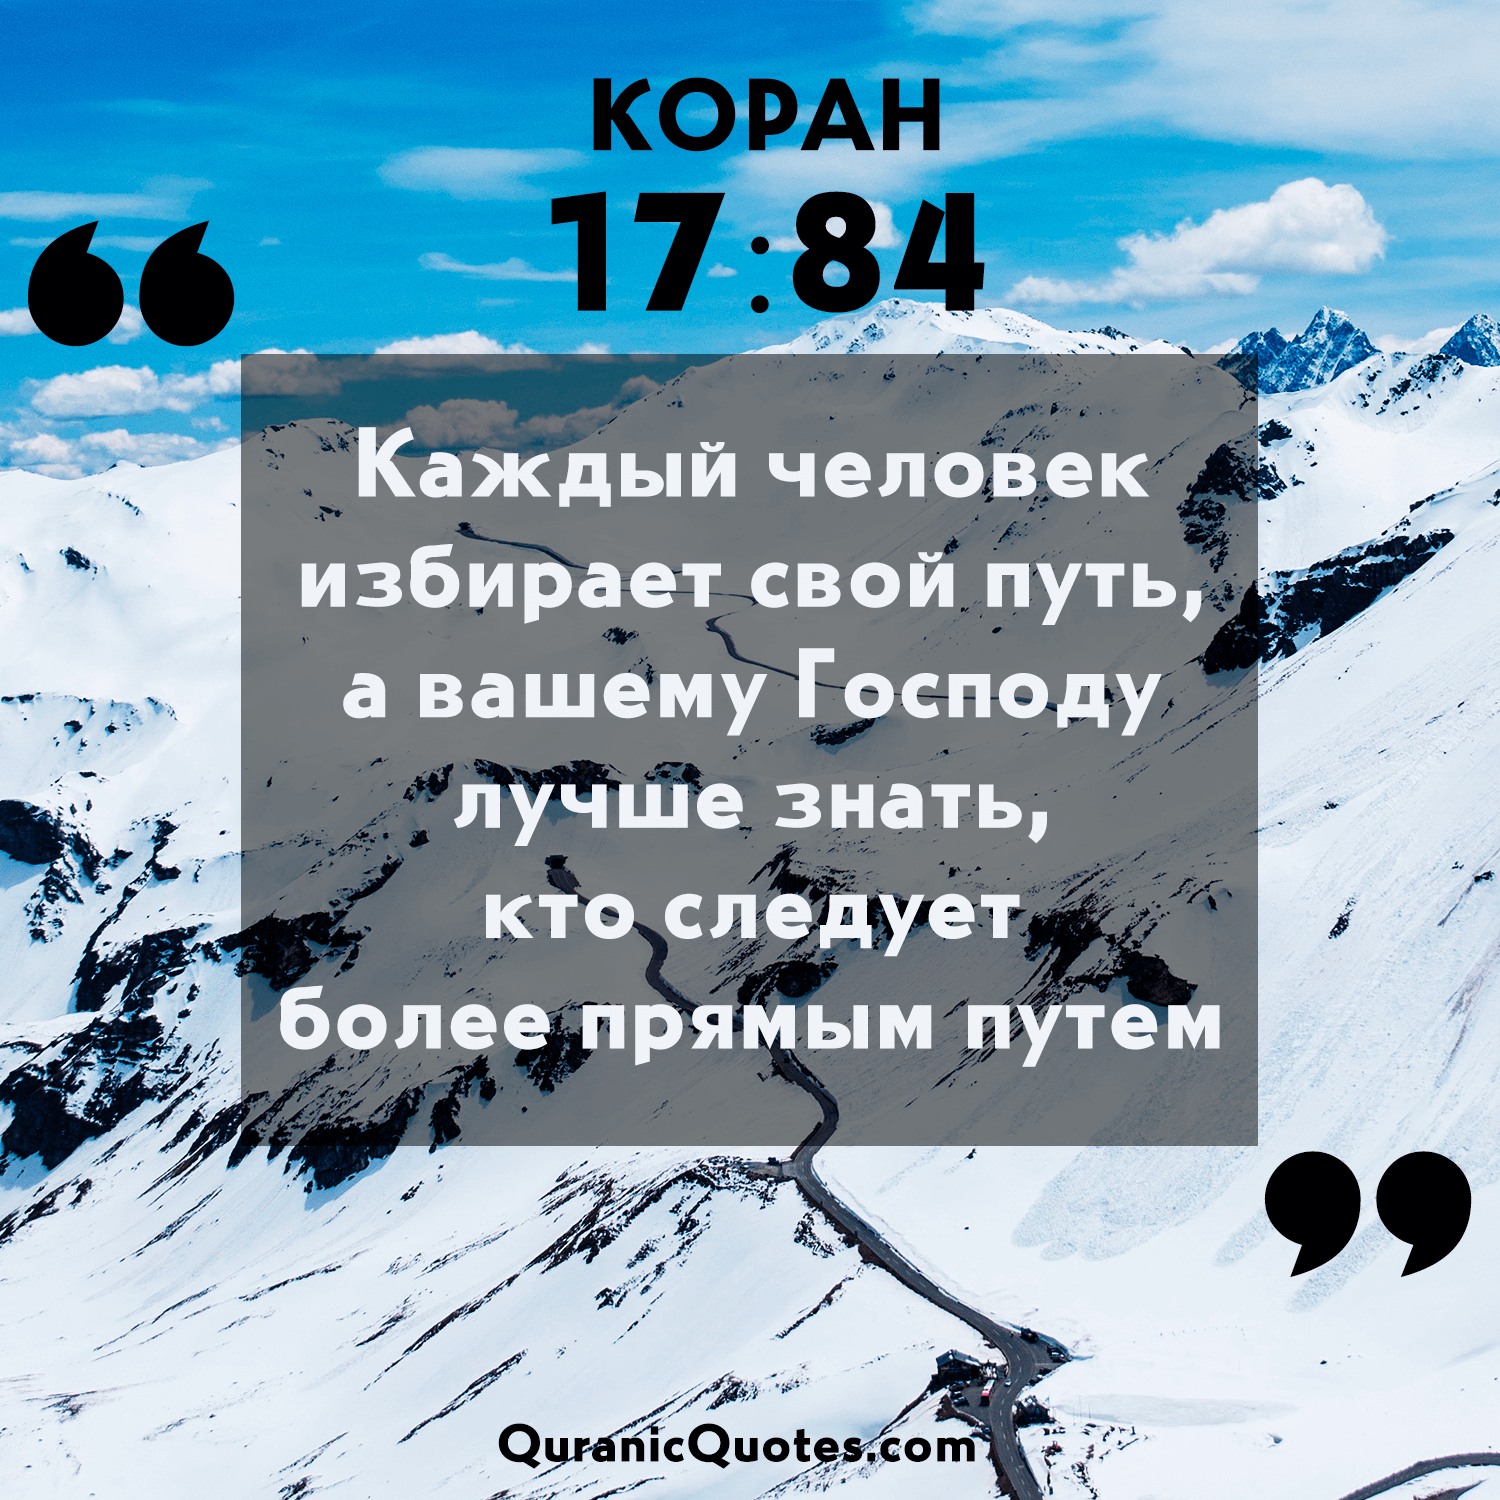 Quranic Quotes in Russian #76